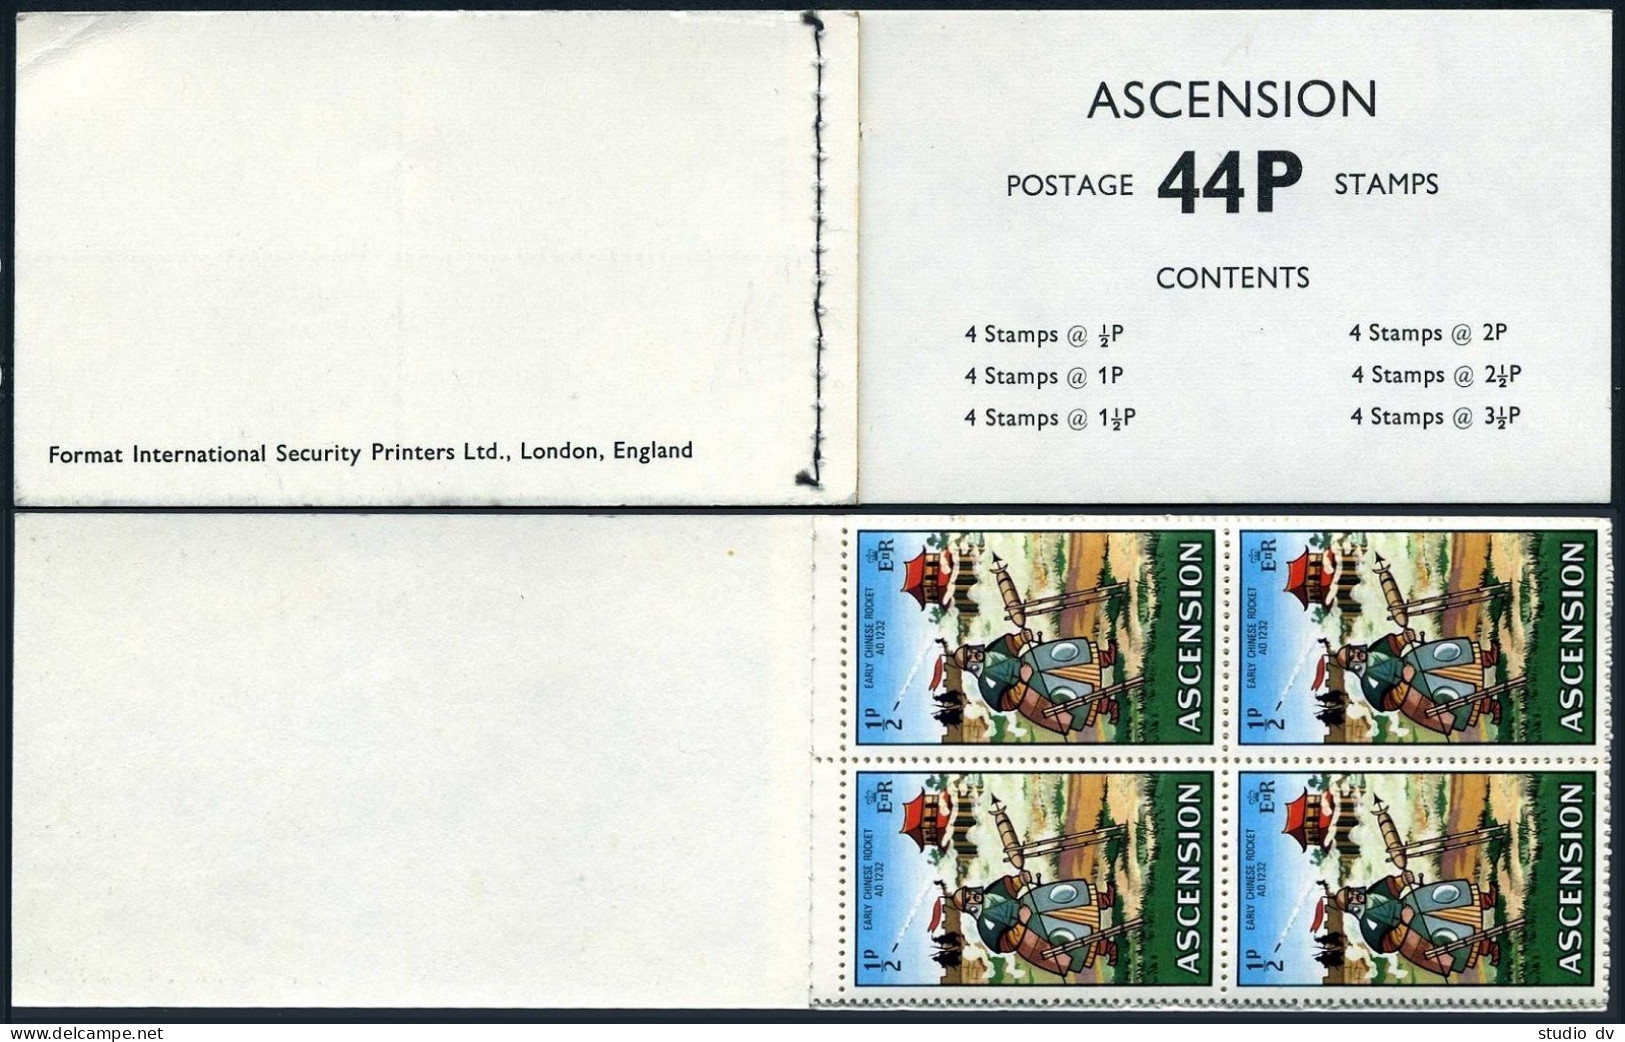 Ascension 138-143a Booklet,MNH.Mi 138-151. Man Into Space,1971.Astronomy.. - Ascension